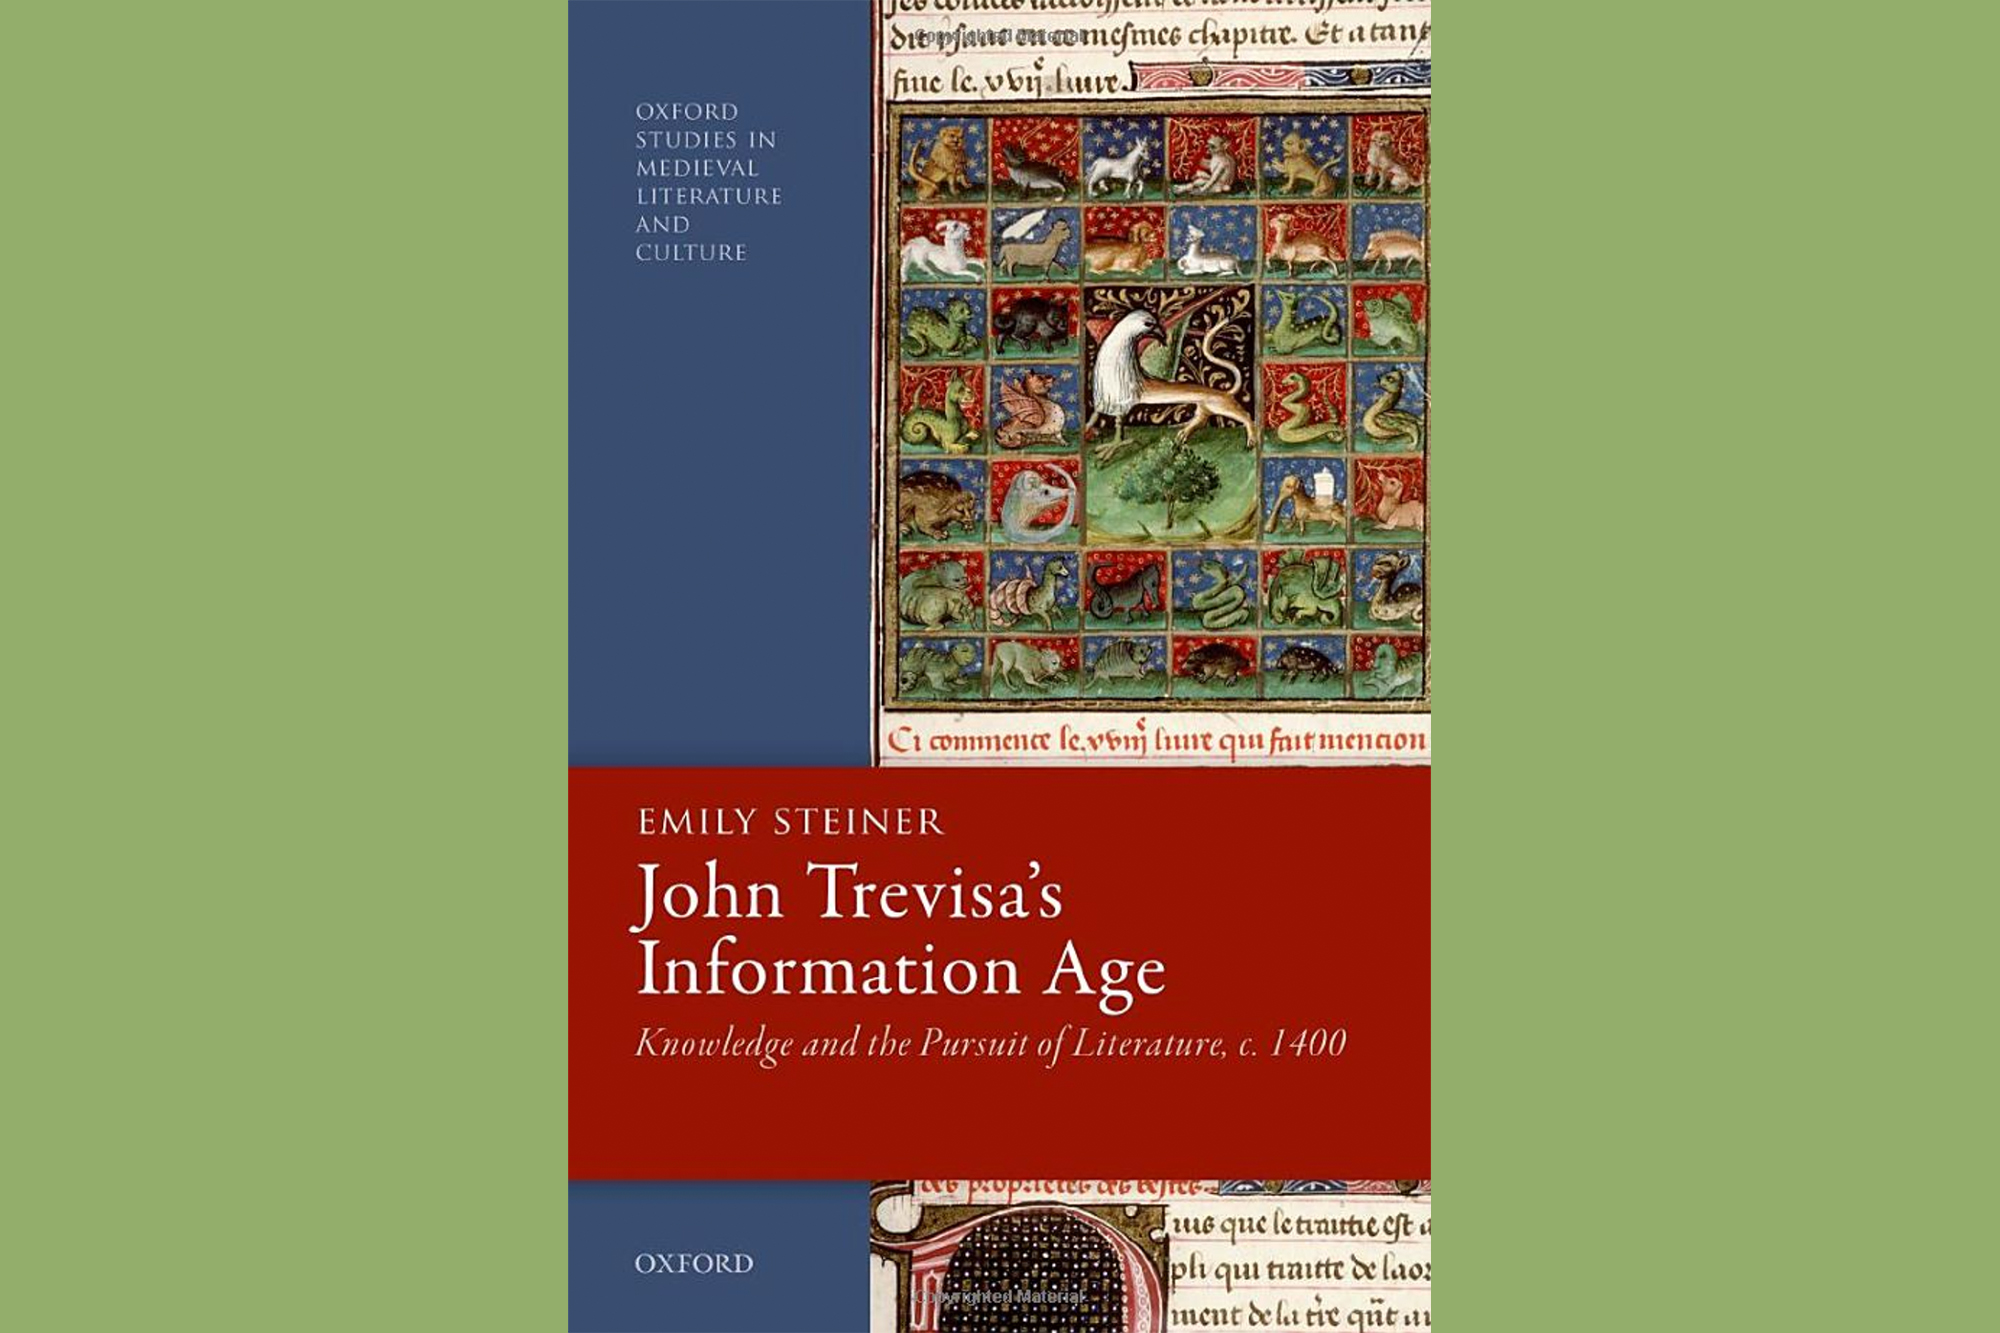 Book cover of Emily Steiner’s book “John Trevisa’s Information Age.”